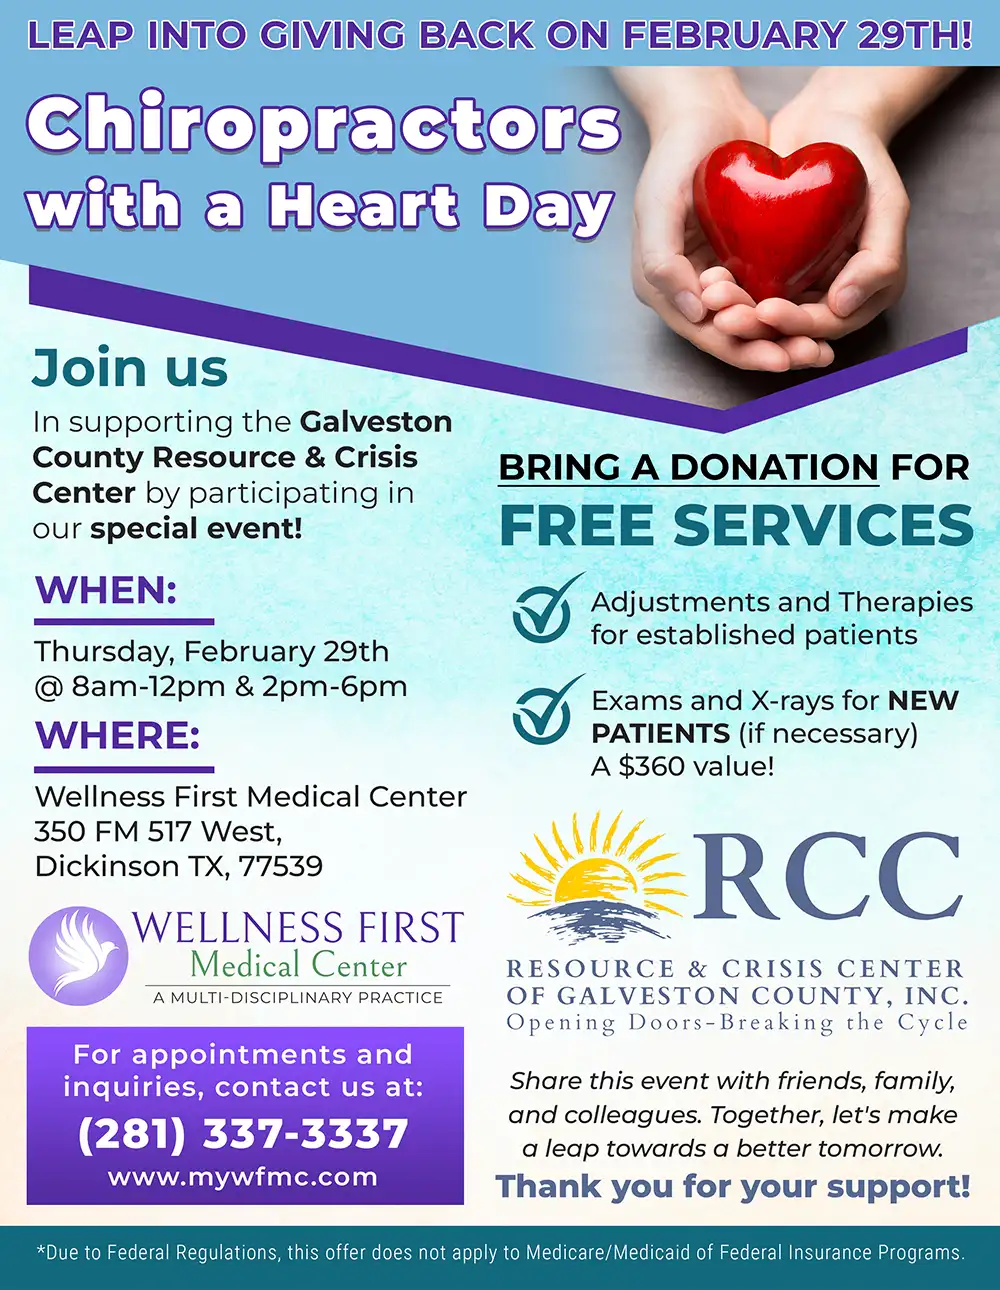 Wellness First Medical Center - Chiropractors with a Heart Day!